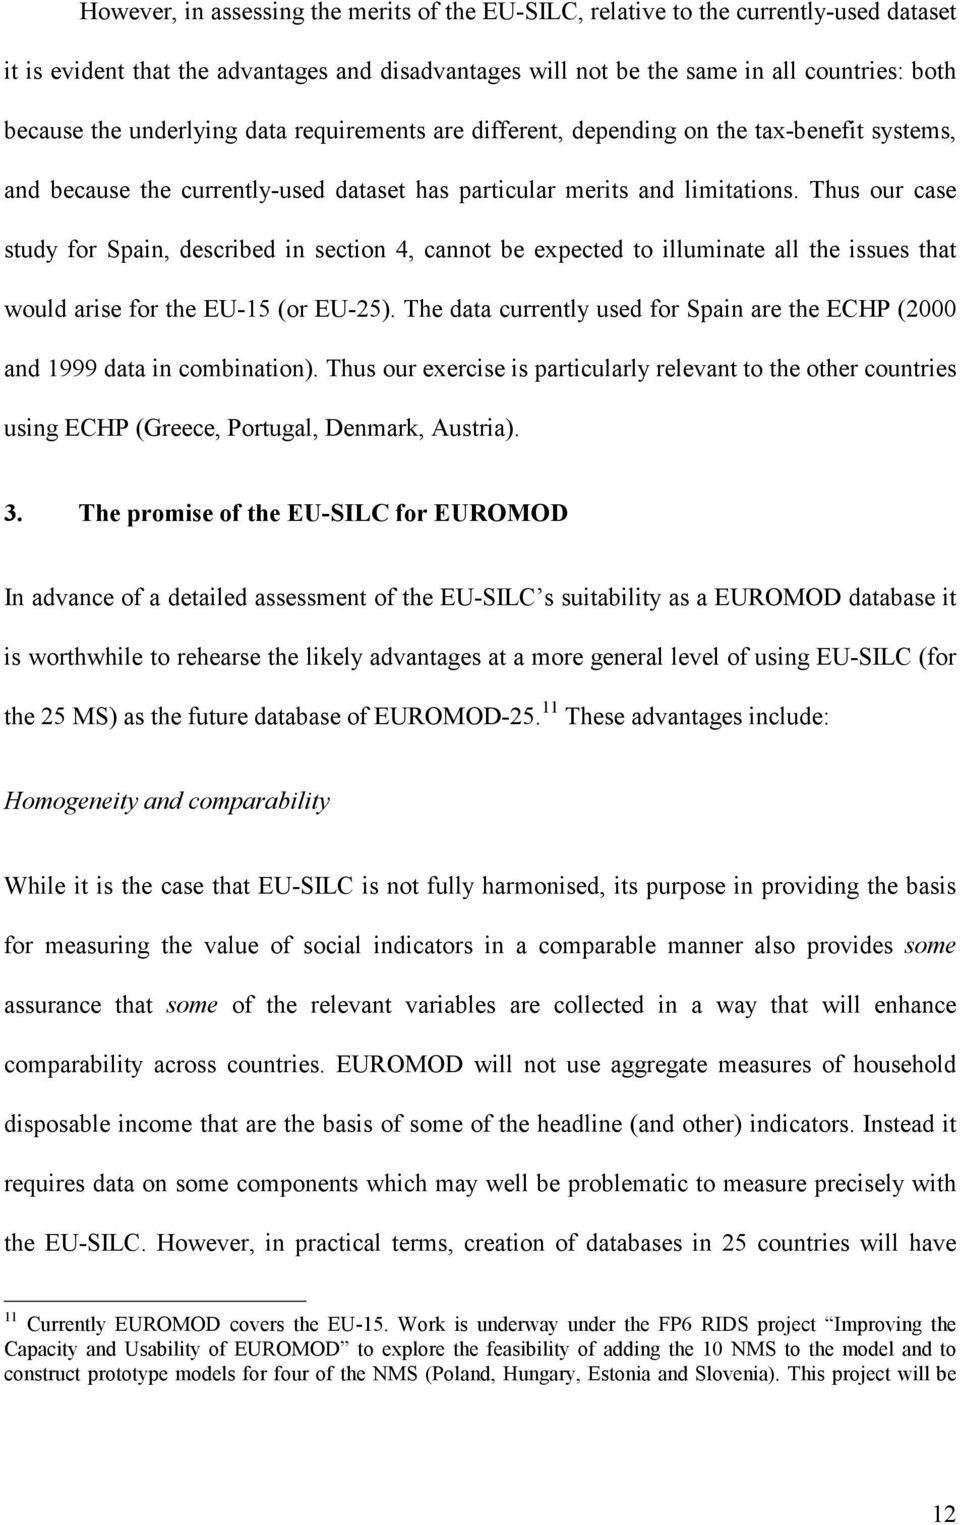 Thus our case study for Spain, described in section 4, cannot be expected to illuminate all the issues that would arise for the EU-15 (or EU-25).